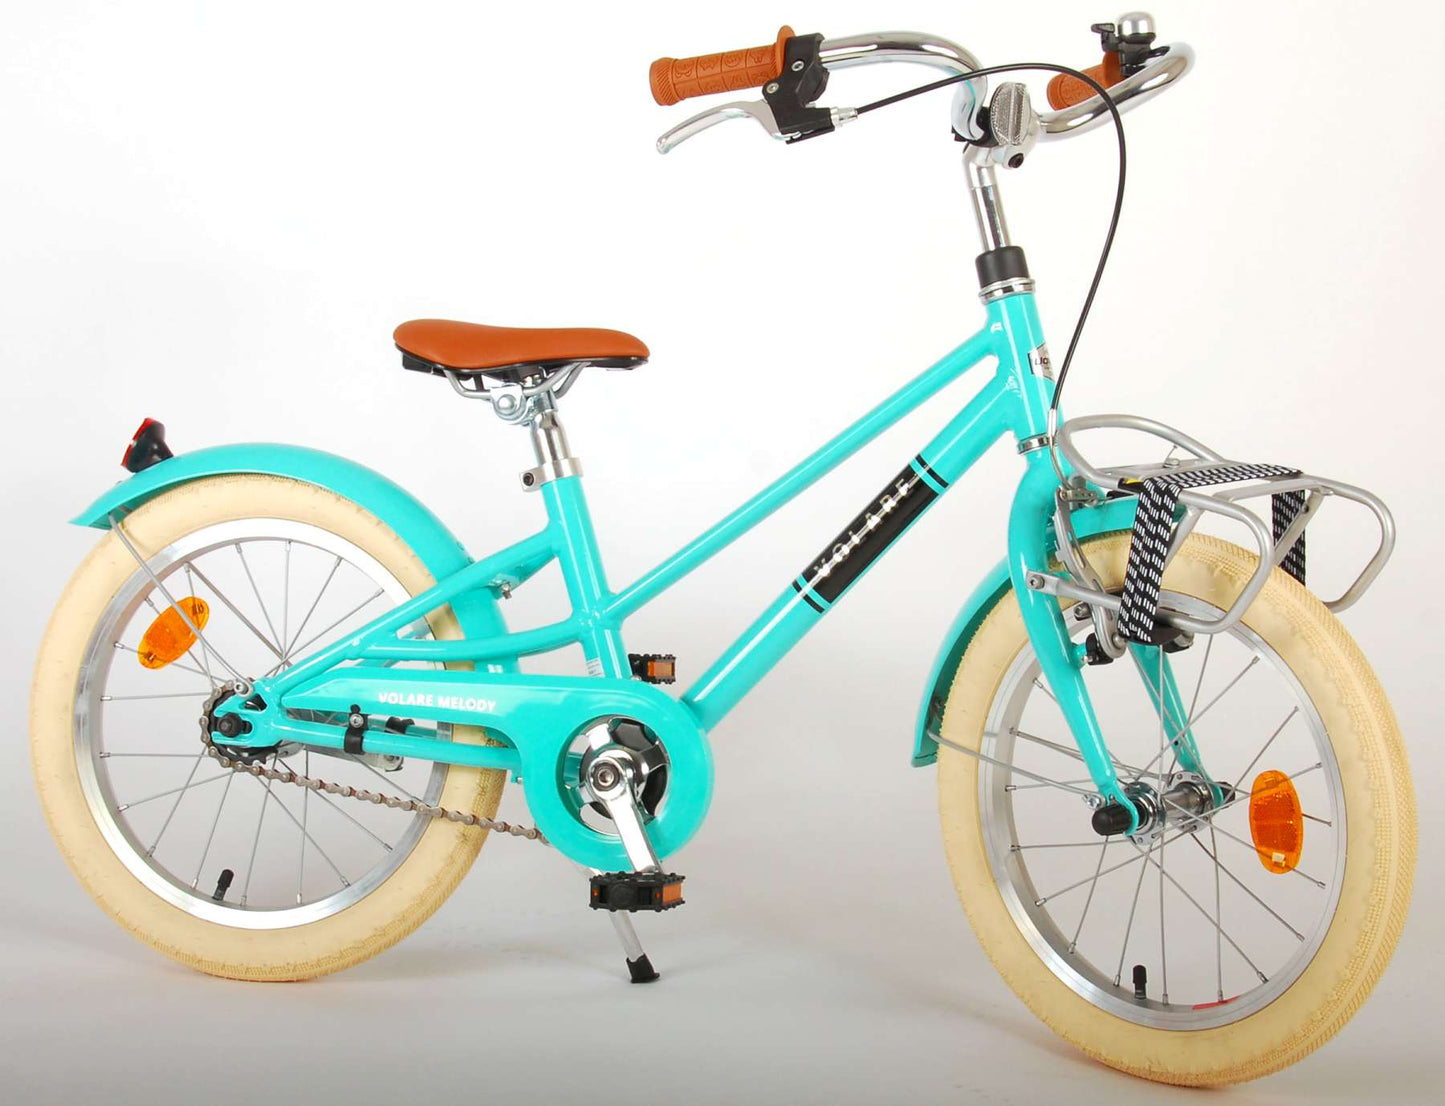 Bicycle per bambini Melody Vlatare - Girls - 16 pollici - Turquoise - Prime Collection